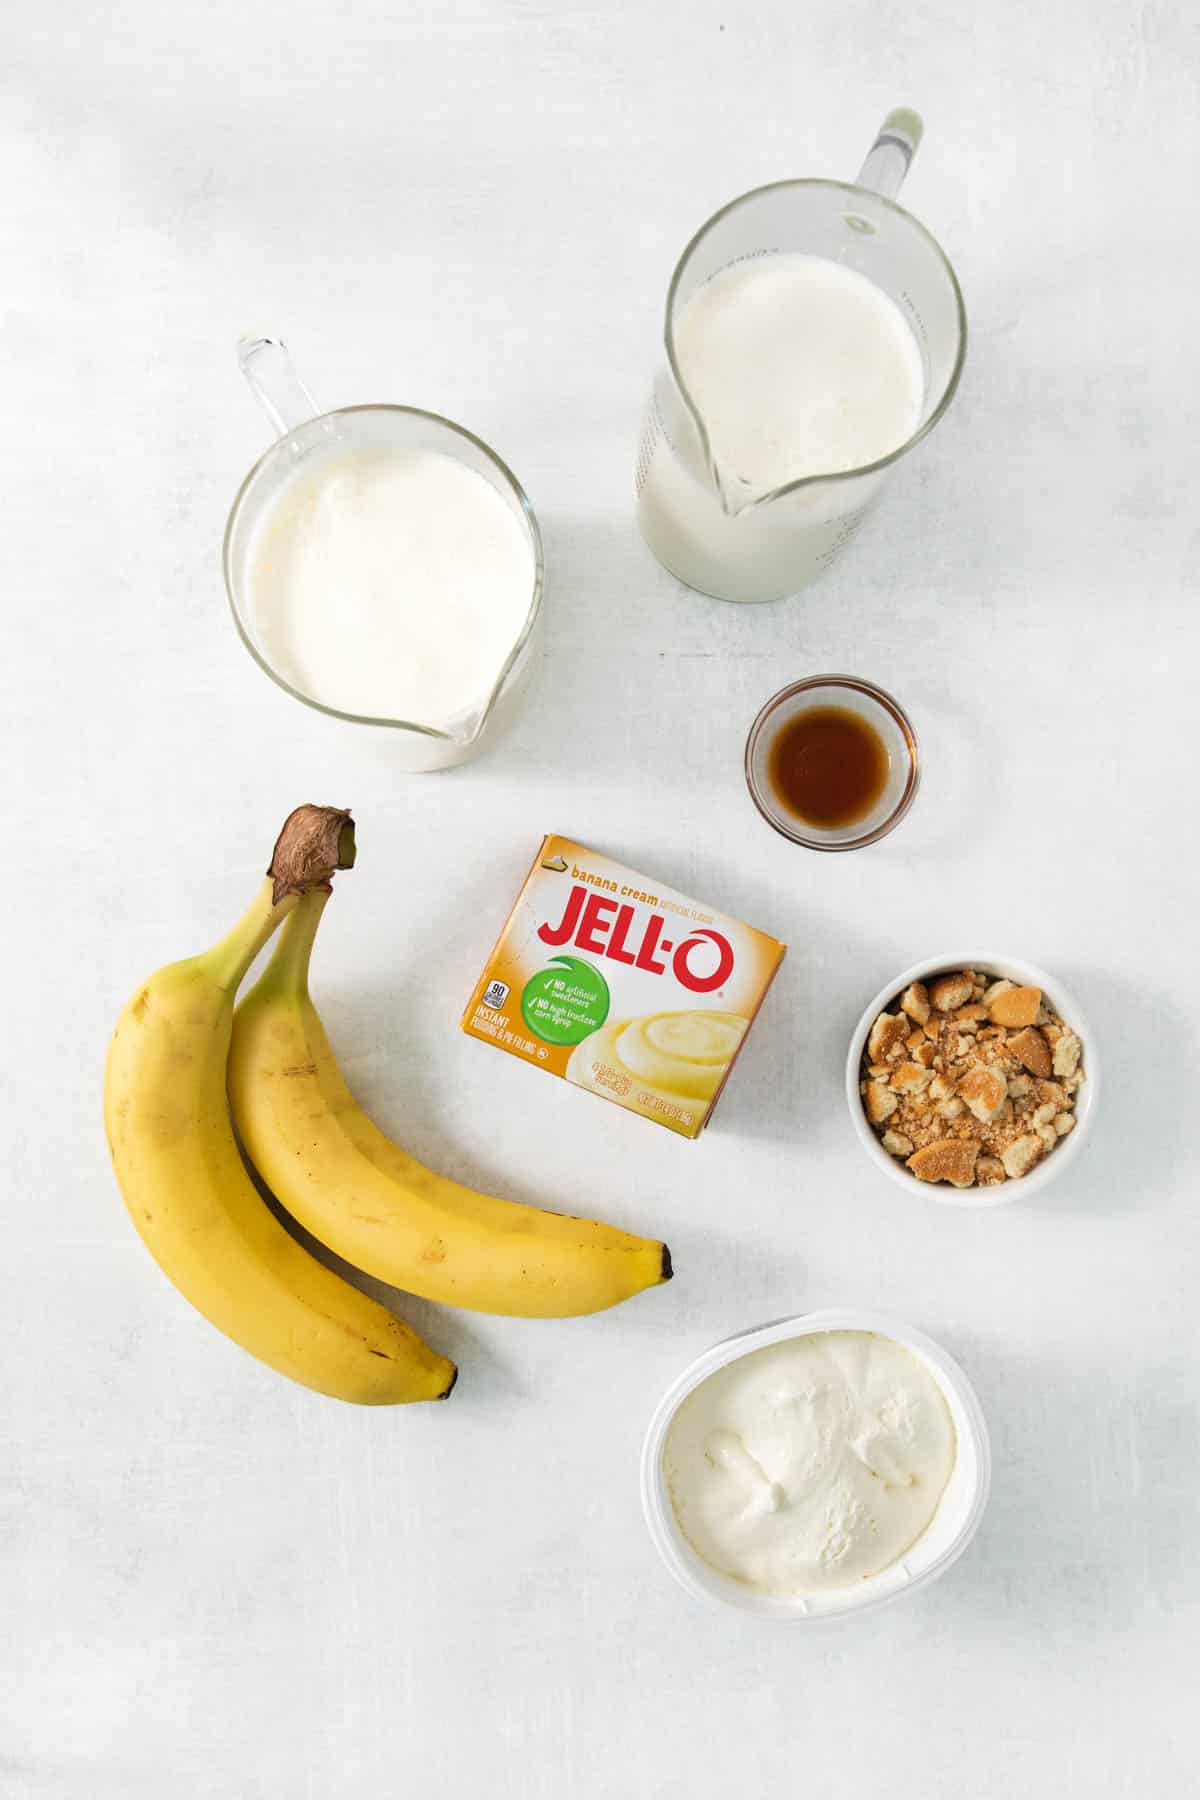 Bananas, yogurt, granola and other ingredients are laid out on a white surface.